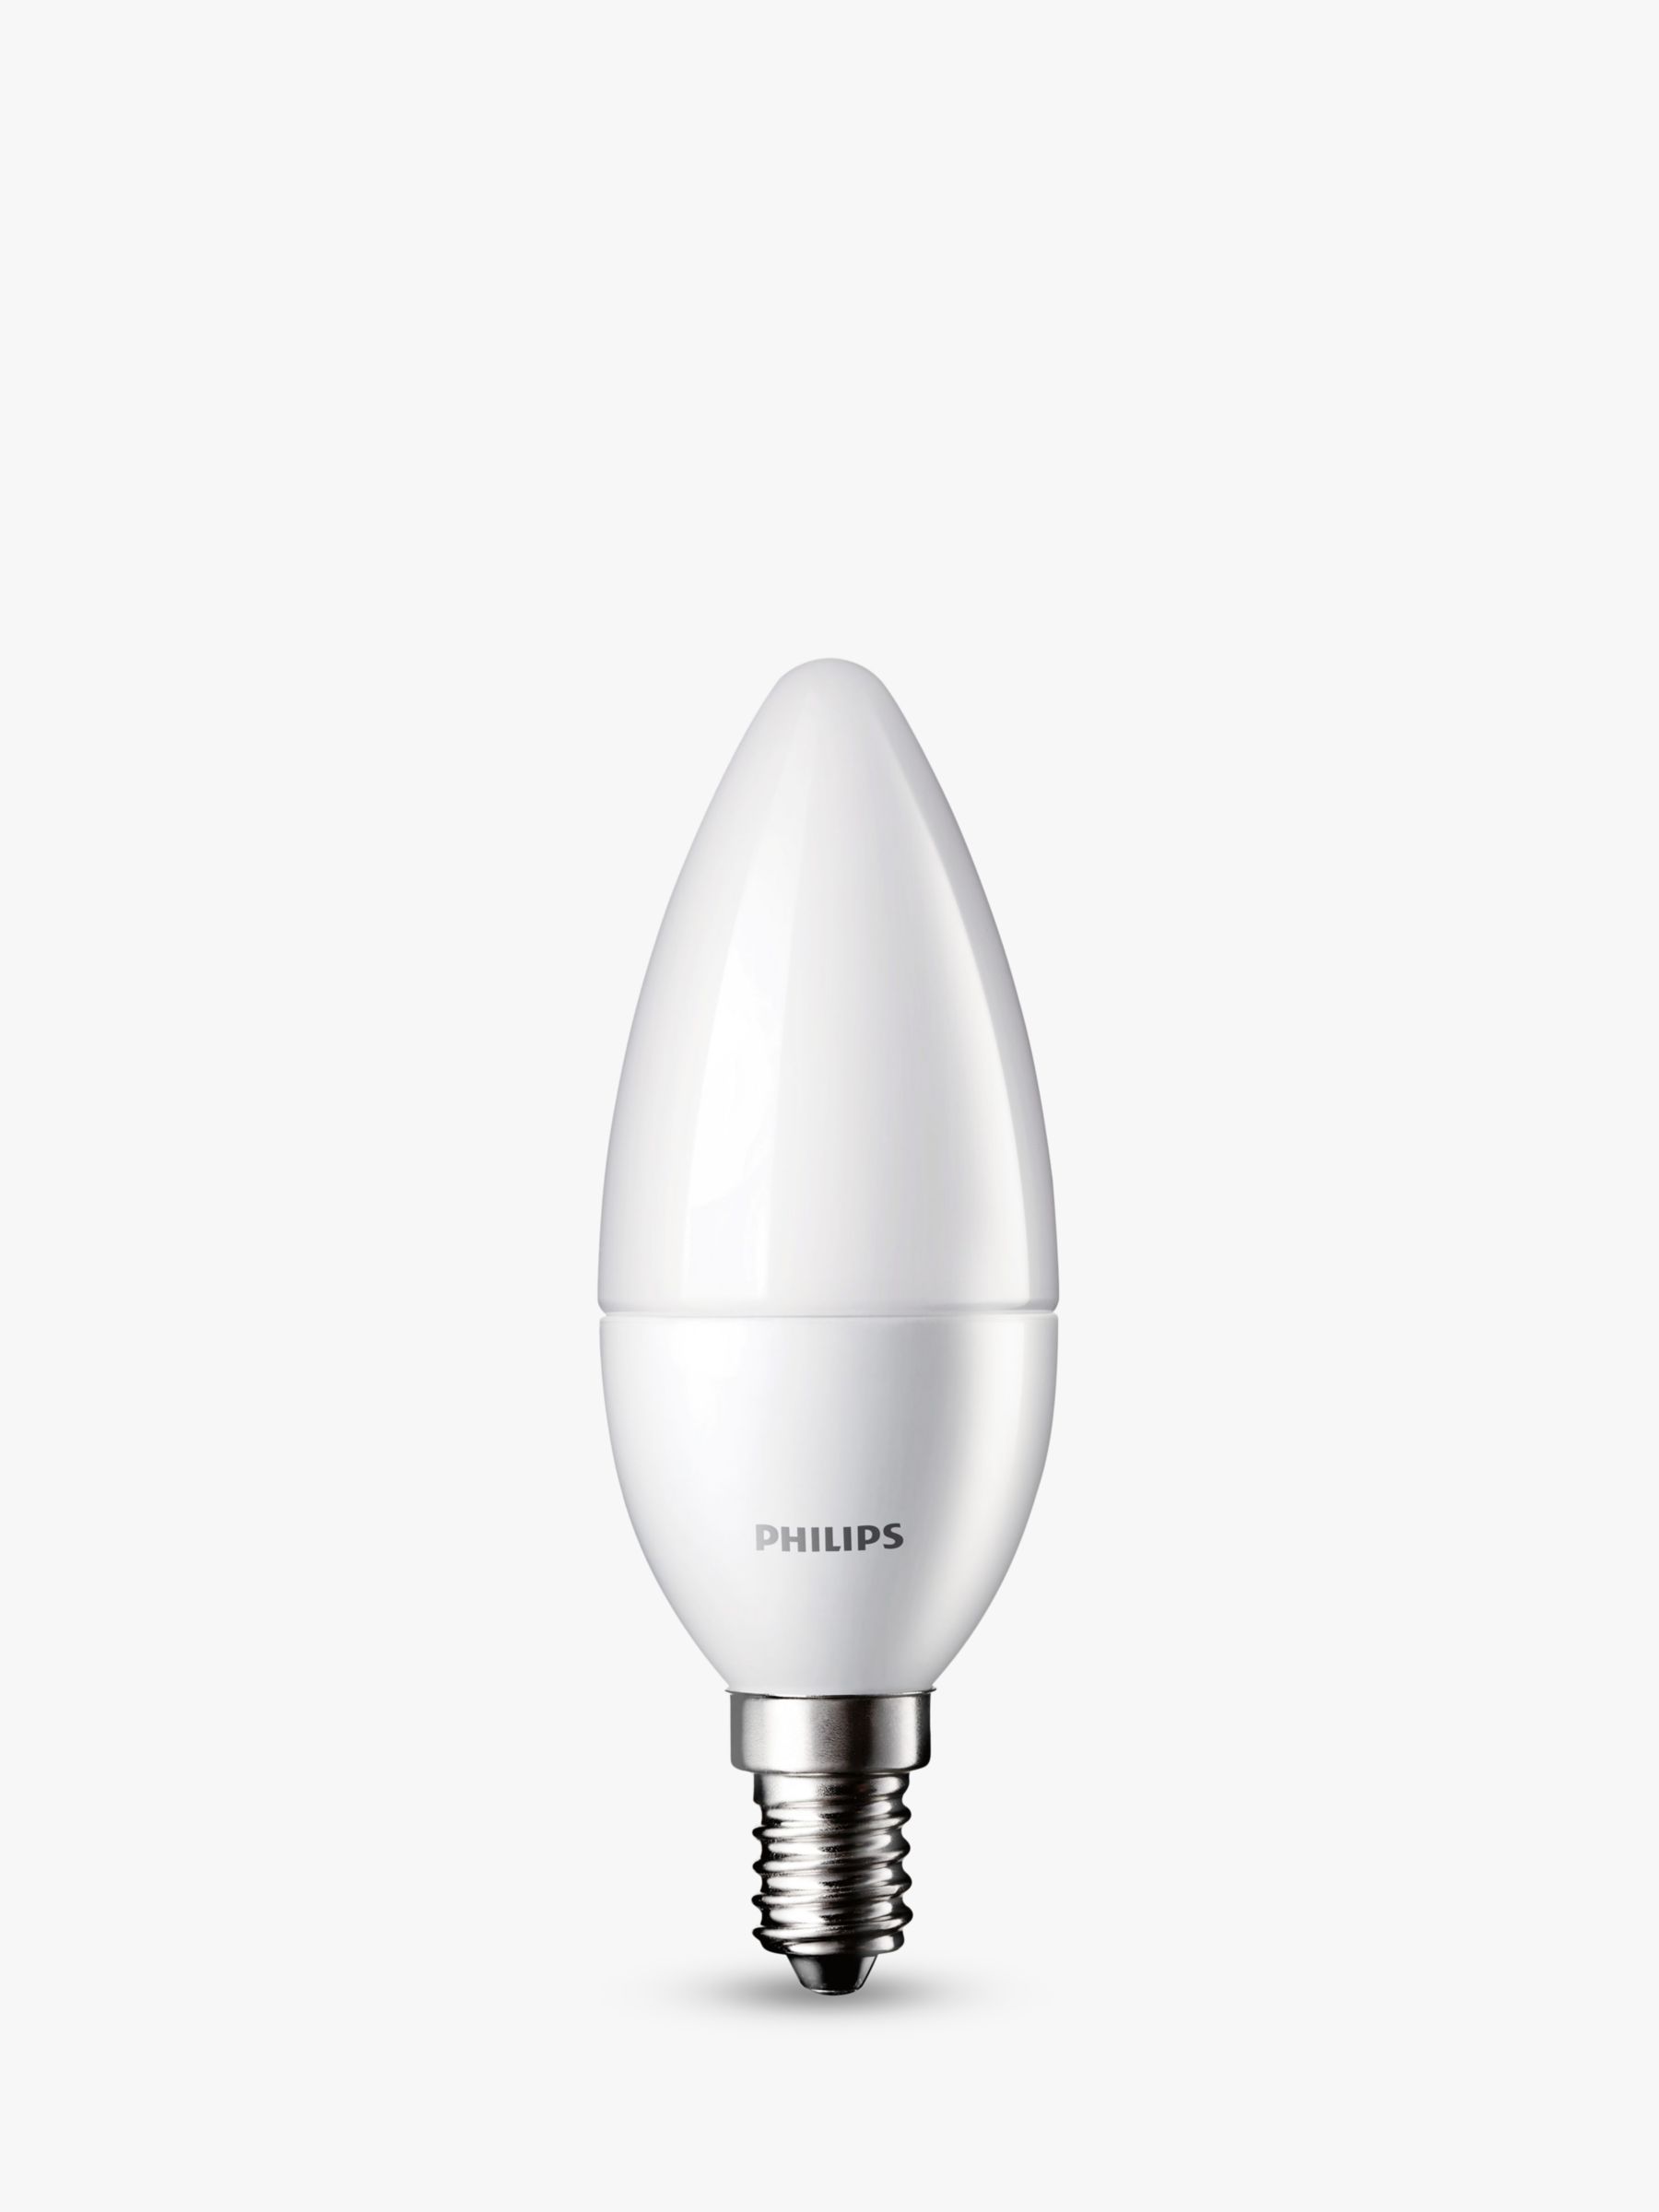 Photo of Philips 5w ses led candle light bulb frosted